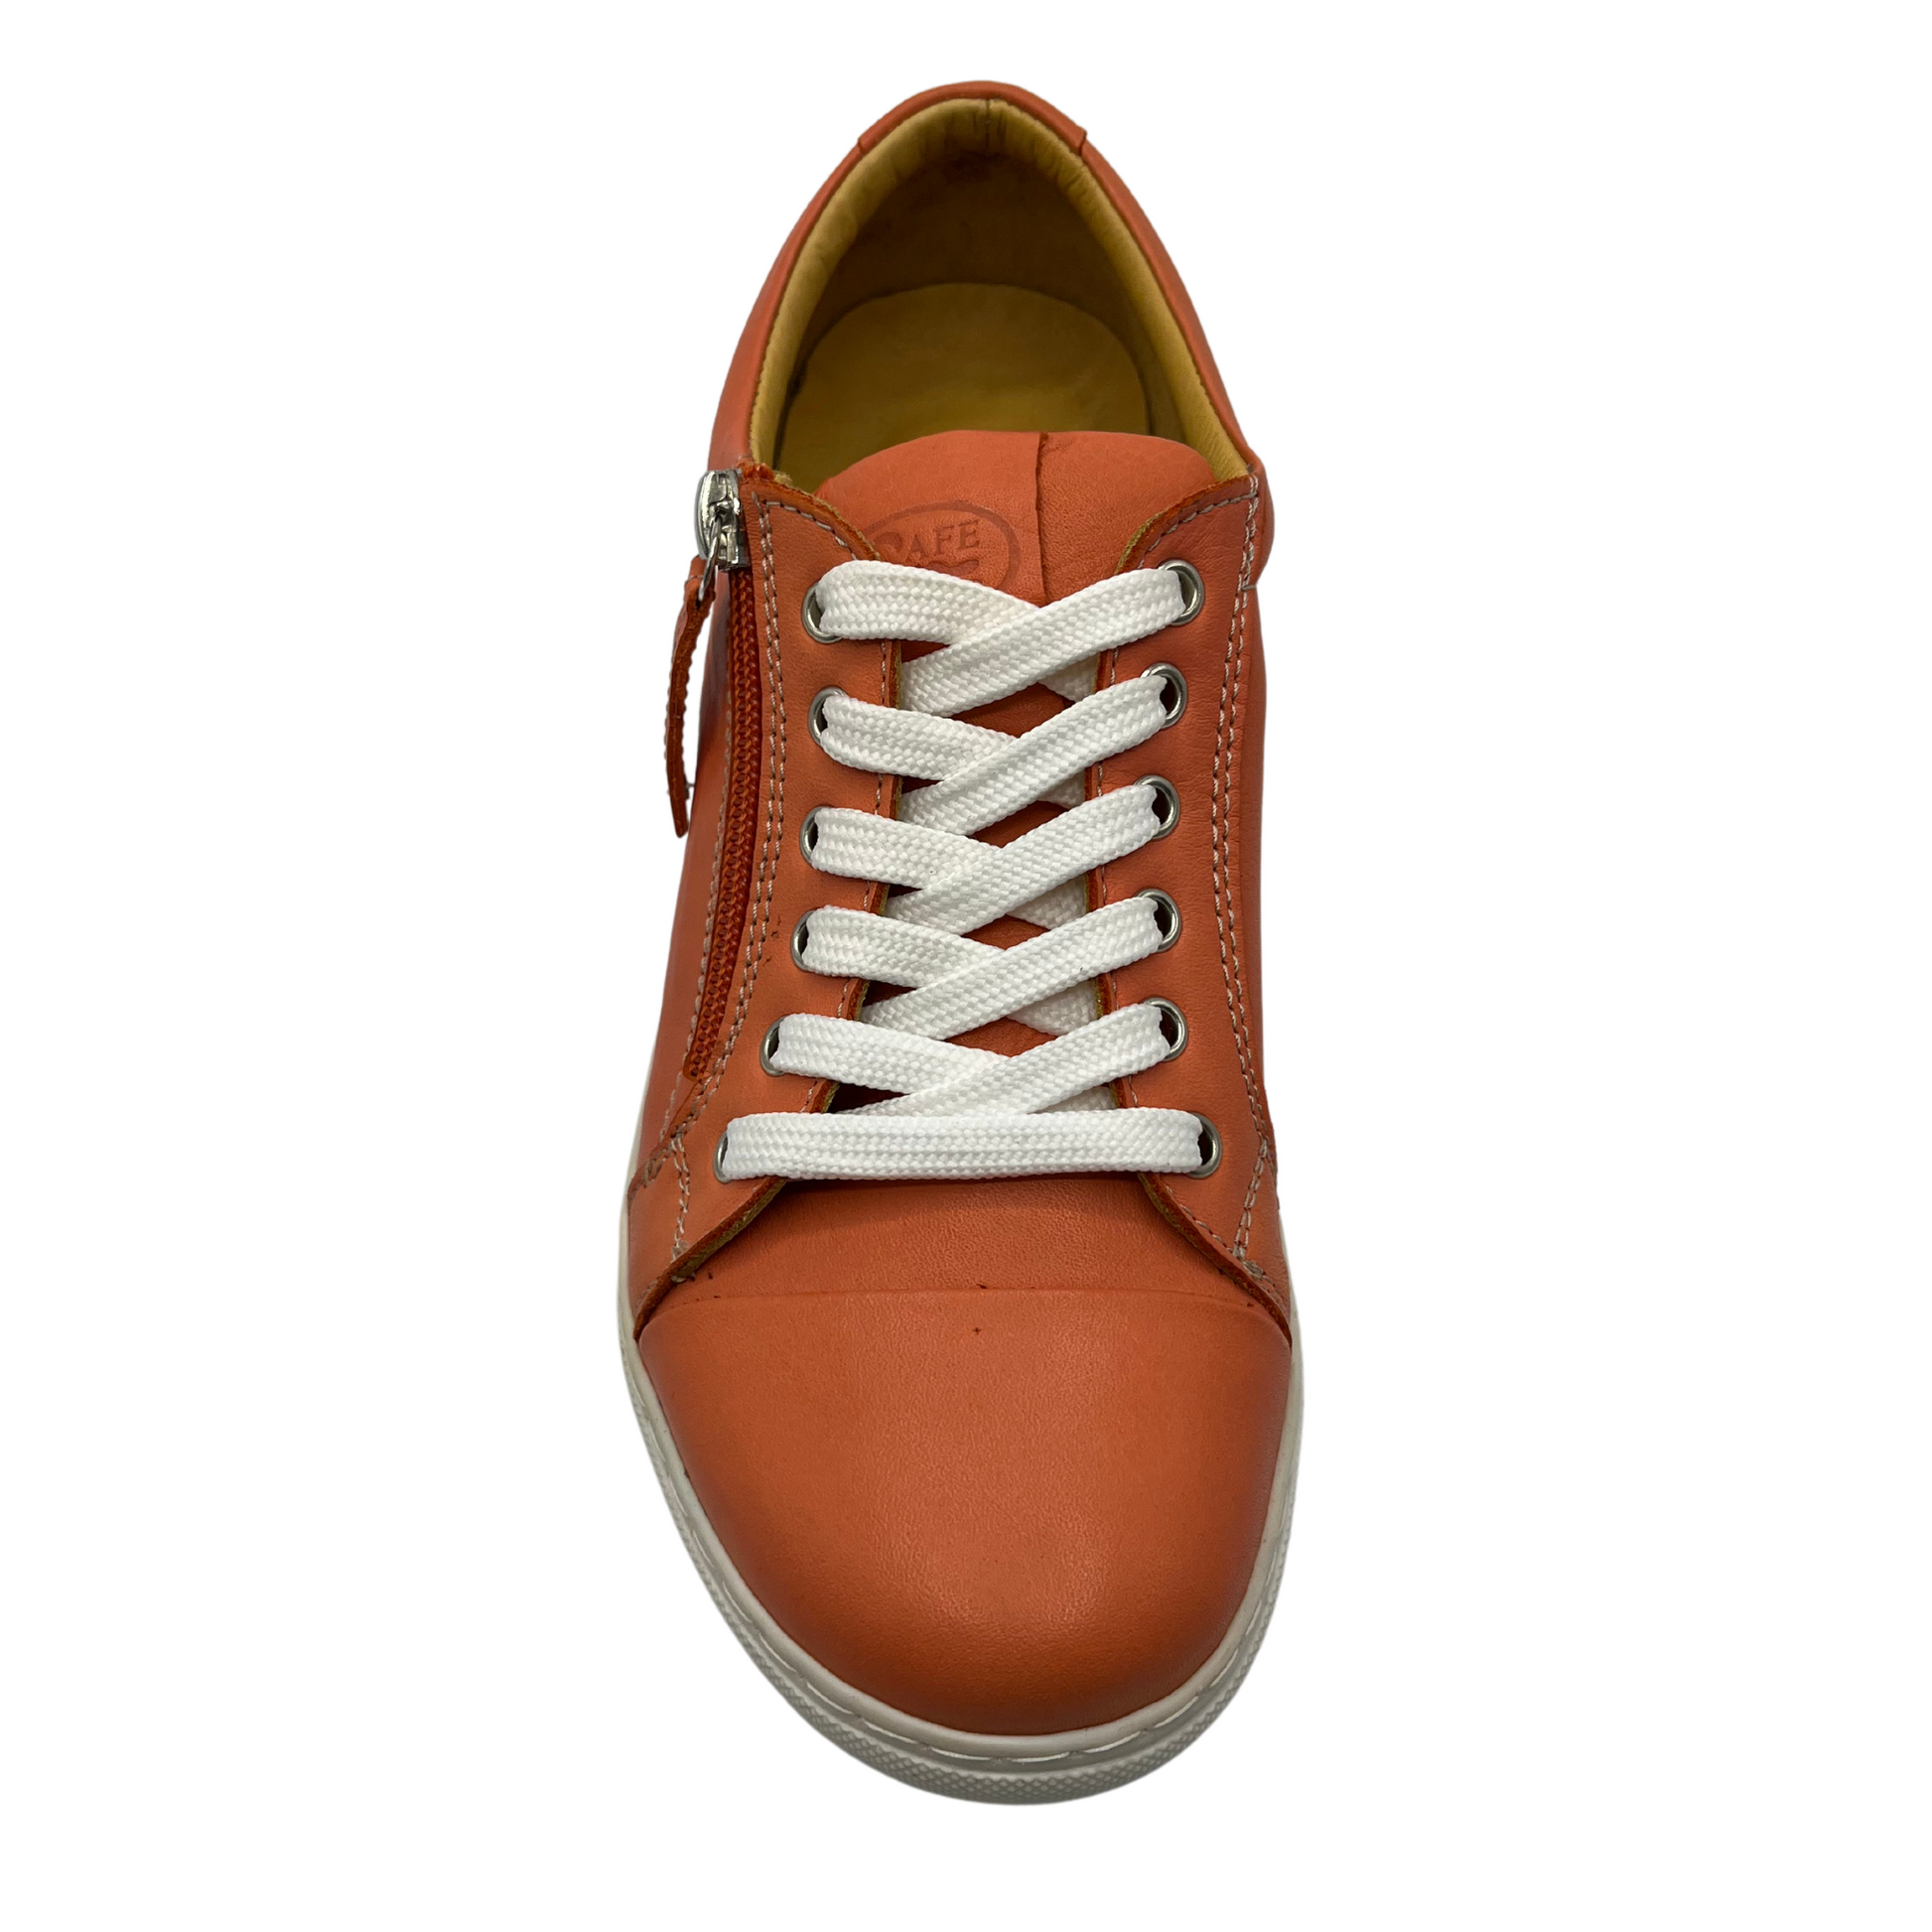 Top view of orange leather sneaker with white rubber outsole and white laces.